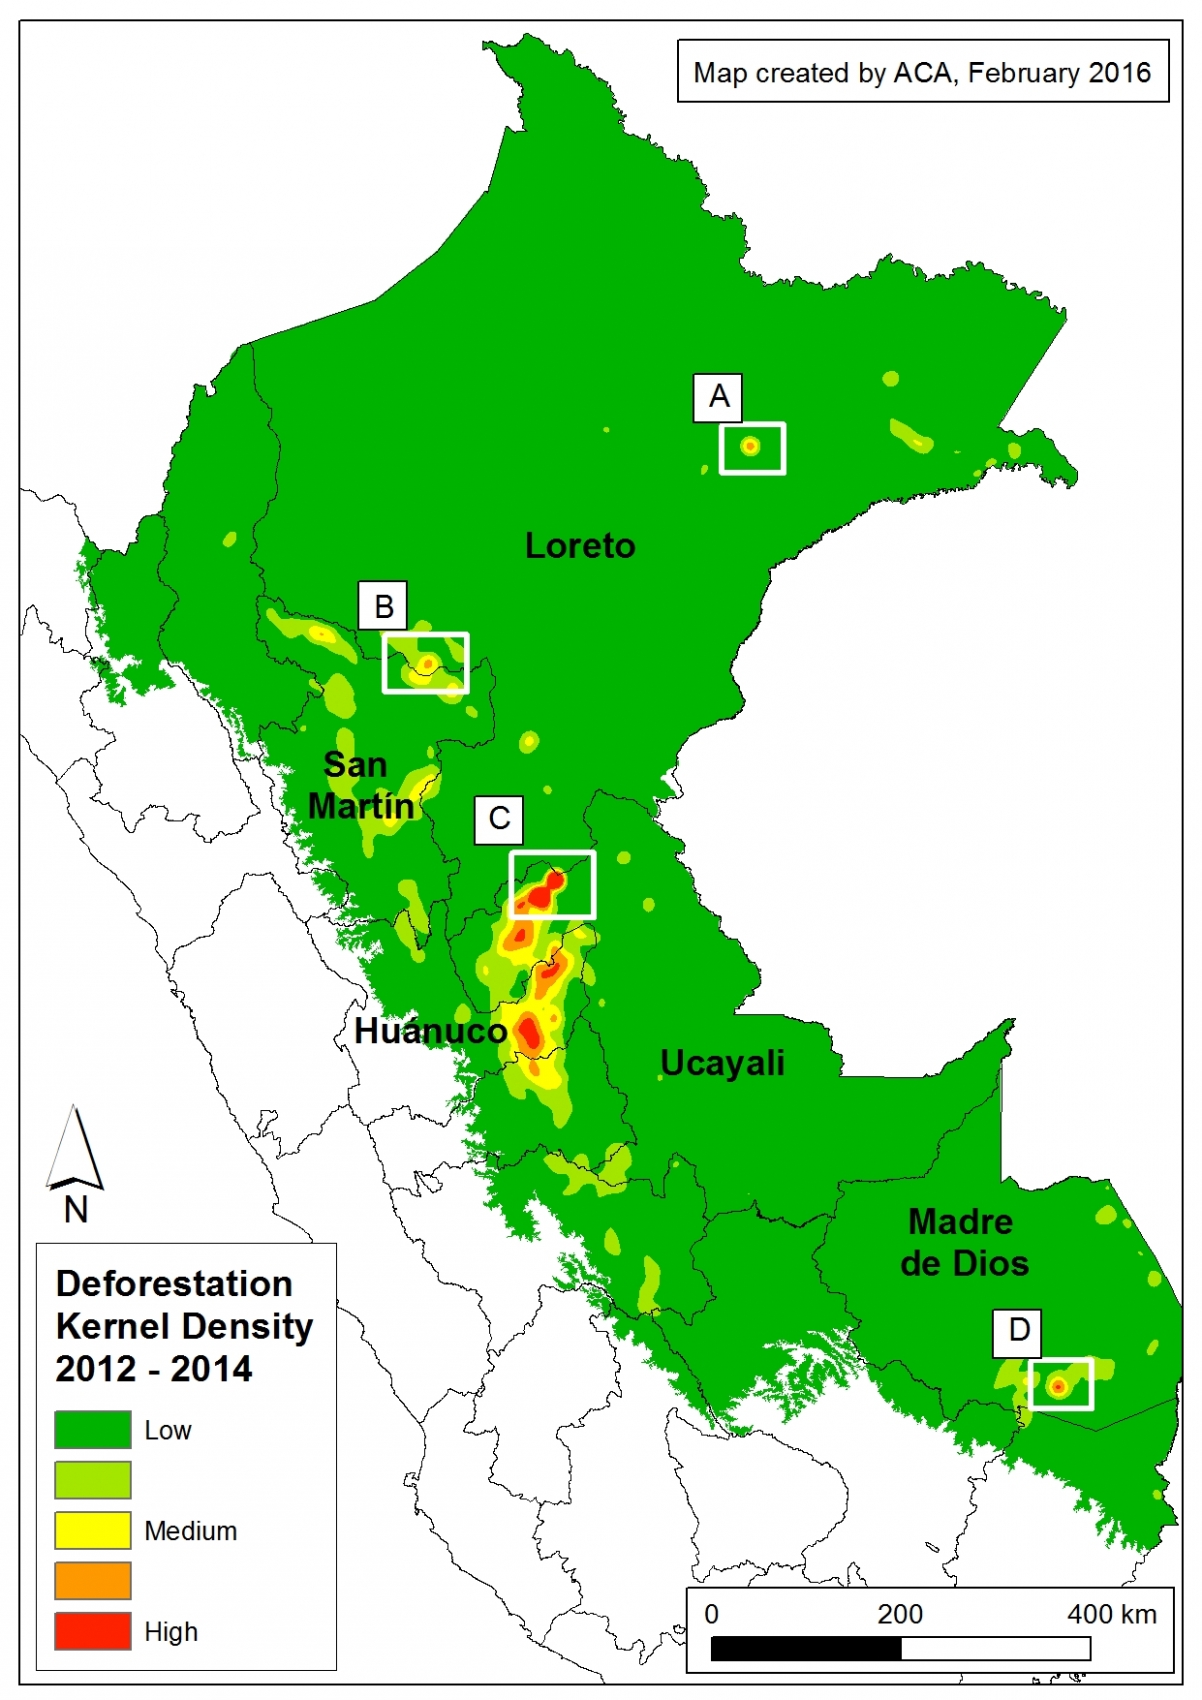 Image 25a. Kernel density map for forest loss in the Peruvian Amazon between 2012 and 2014. Data: PNCB/MINAM, Hansen/UMD/Google/USGS/NASA.